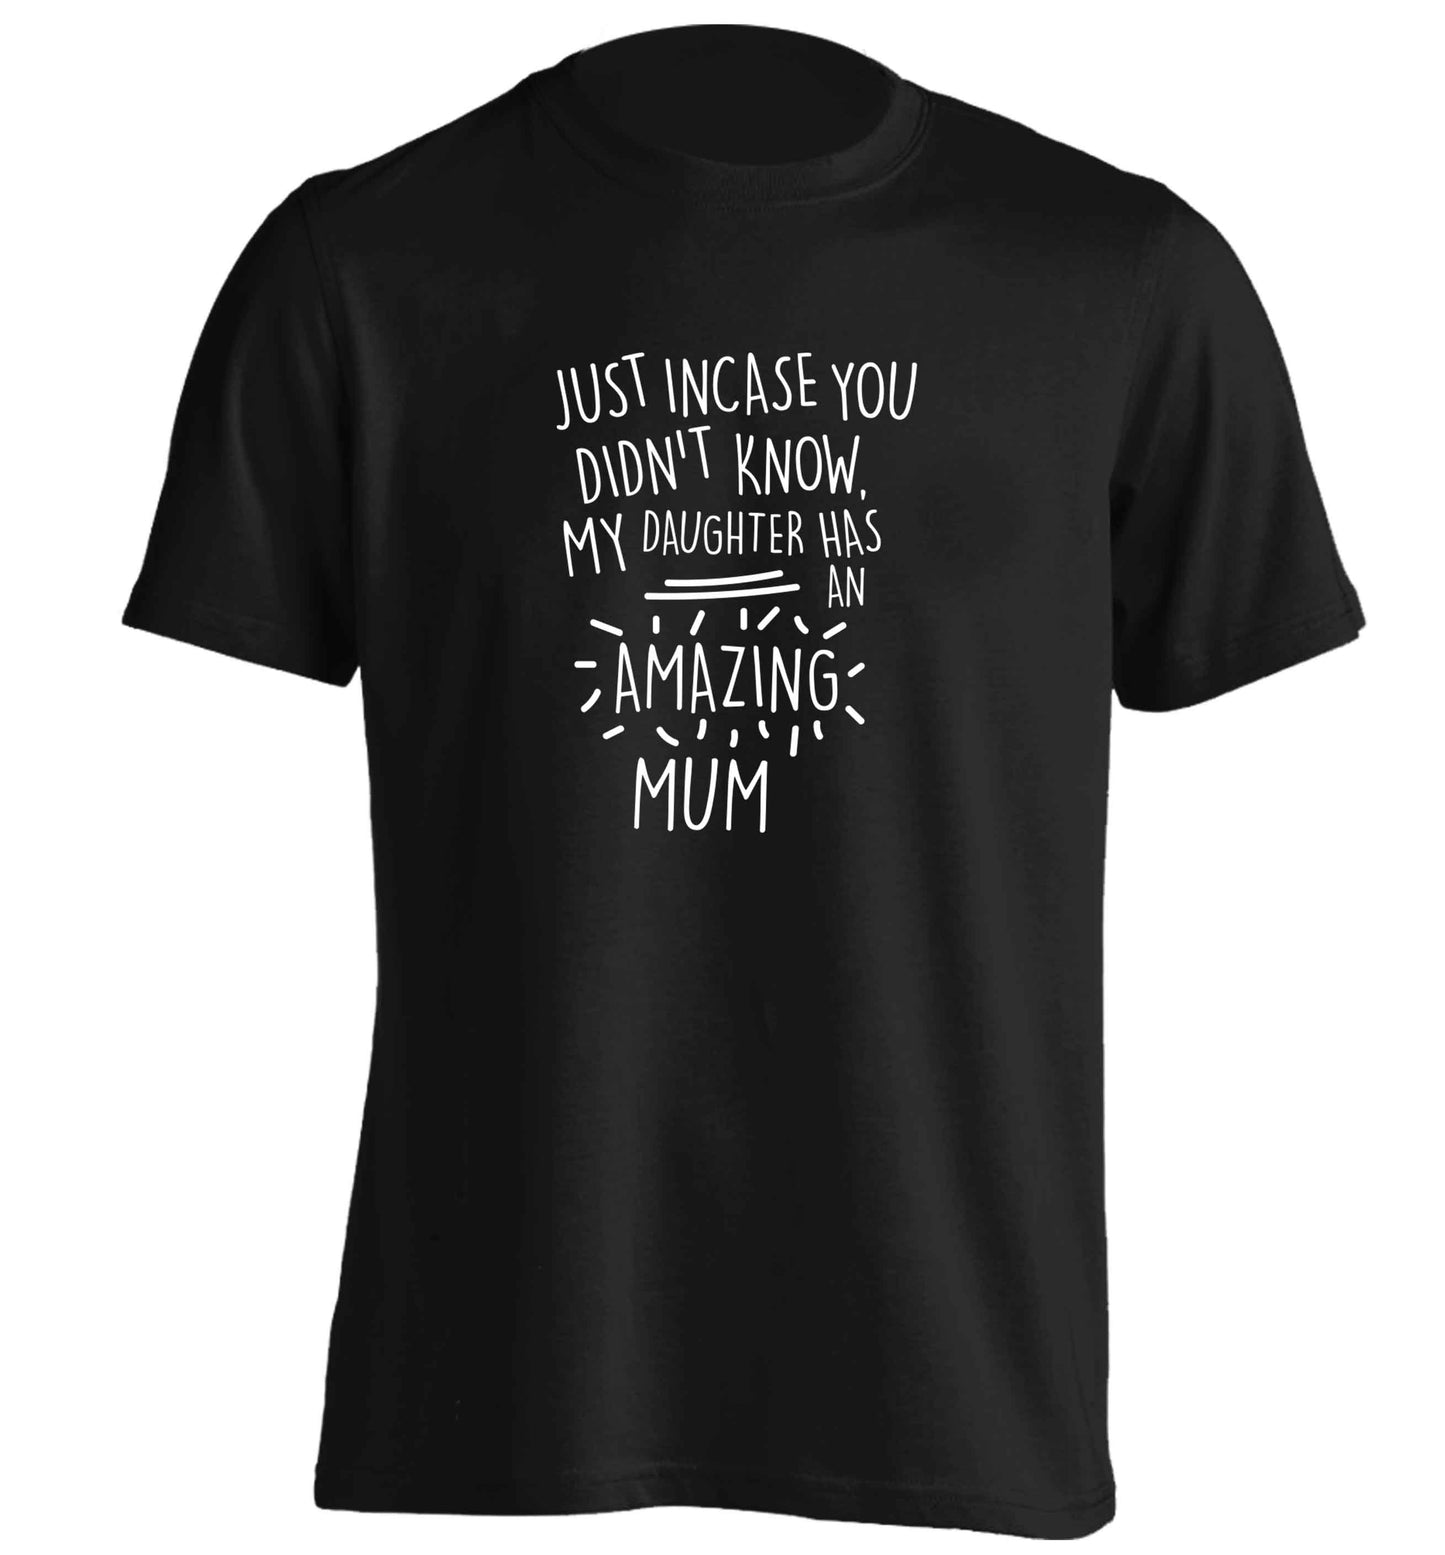 Just incase you didn't know my daughter has an amazing mum adults unisex black Tshirt 2XL